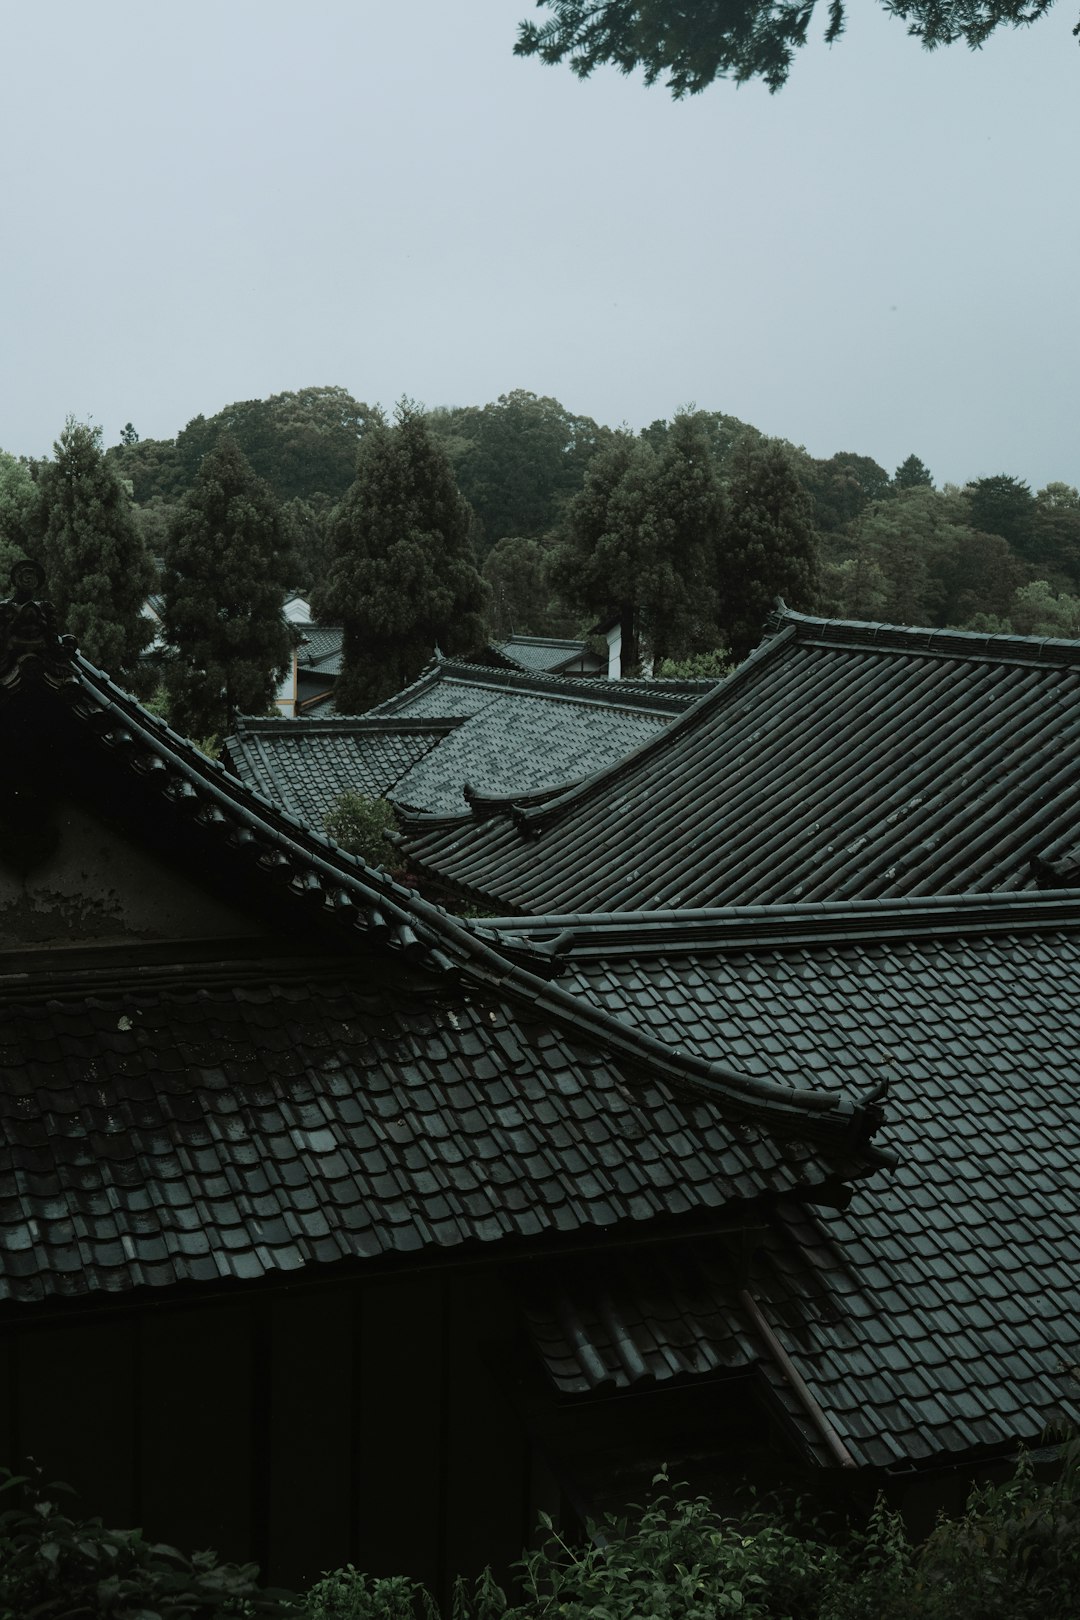 A rainy and foggy day in Nara, Japan with Japanese roof tops.